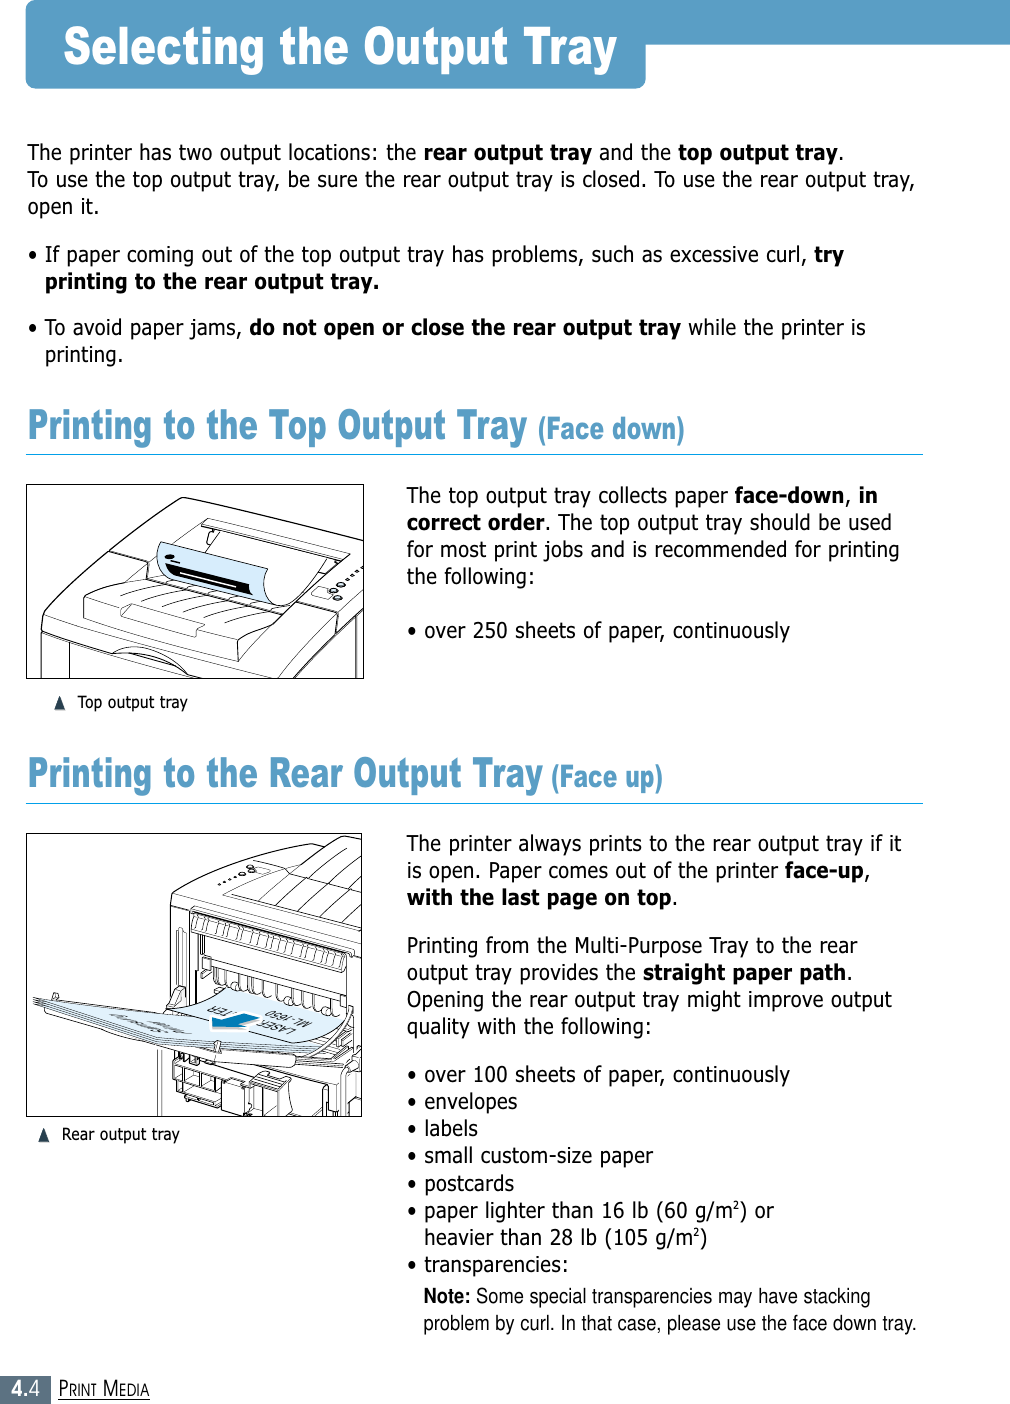 4.4PRINT MEDIASelecting the Output TrayThe printer has two output locations: the rear output tray and the top output tray. To use the top output tray, be sure the rear output tray is closed. To use the rear output tray,open it.• If paper coming out of the top output tray has problems, such as excessive curl, tryprinting to the rear output tray.• To avoid paper jams, do not open or close the rear output tray while the printer isprinting.The top output tray collects paper face-down, incorrect order. The top output tray should be usedfor most print jobs and is recommended for printingthe following:• over 250 sheets of paper, continuously➐➐➐➐Top output trayThe printer always prints to the rear output tray if itis open. Paper comes out of the printer face-up,with the last page on top.Printing from the Multi-Purpose Tray to the rearoutput tray provides the straight paper path.Opening the rear output tray might improve outputquality with the following:• over 100 sheets of paper, continuously• envelopes• labels• small custom-size paper• postcards• paper lighter than 16 lb (60 g/m2) or heavier than 28 lb (105 g/m2)• transparencies:Note: Some special transparencies may have stackingproblem by curl. In that case, please use the face down tray.SamsungPrinterLASER PRINTERML-1650Printing to the Top Output Tray (Face down)Printing to the Rear Output Tray (Face up)➐➐➐➐Rear output tray